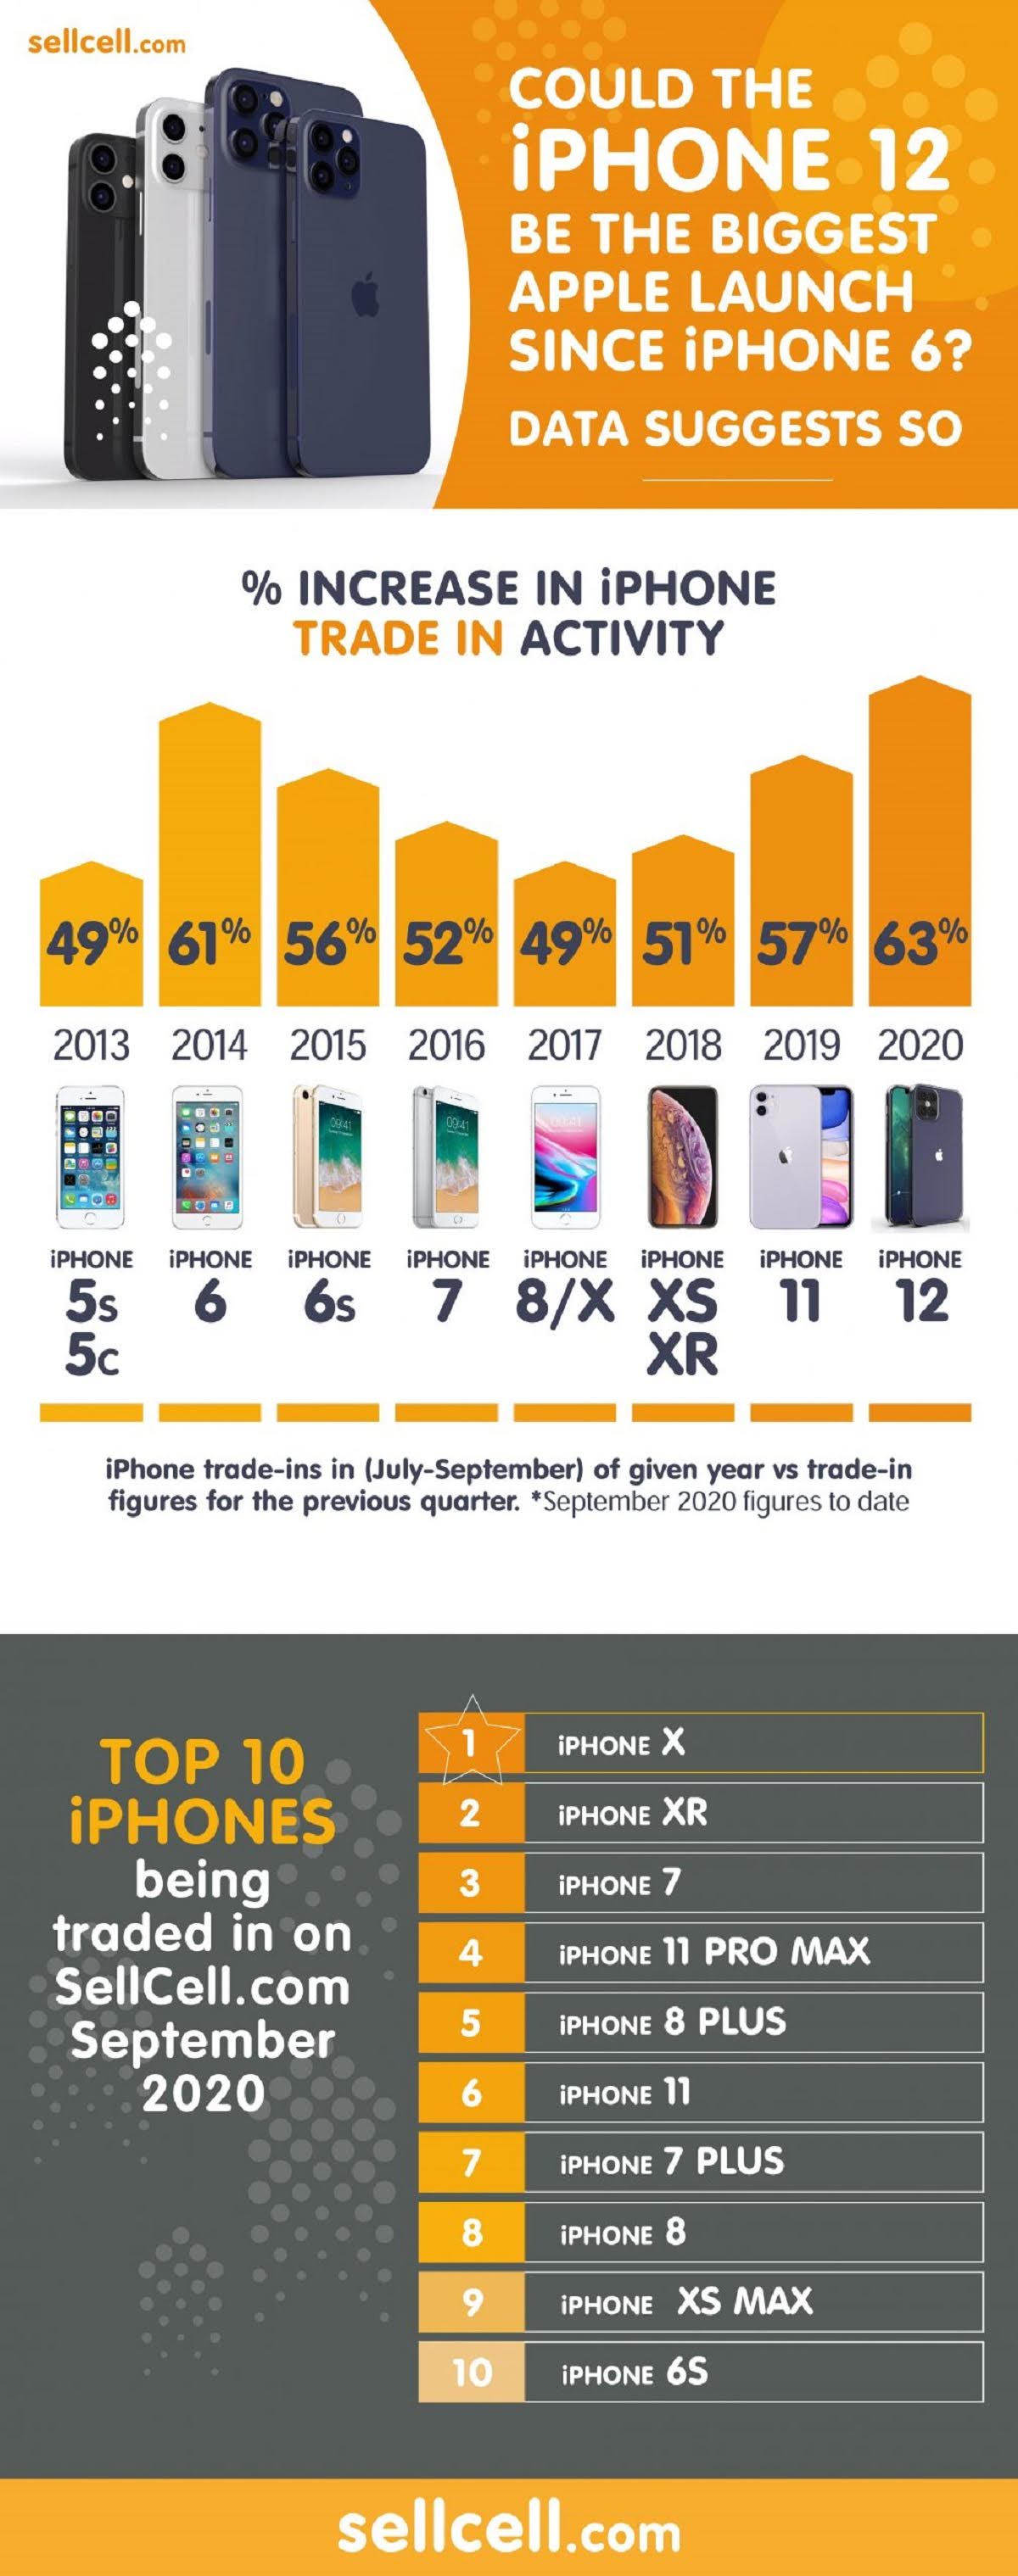 could-the-iphone-12-be-the-biggest-apple-launch-since-iphone-6-data-suggests-so-infographic